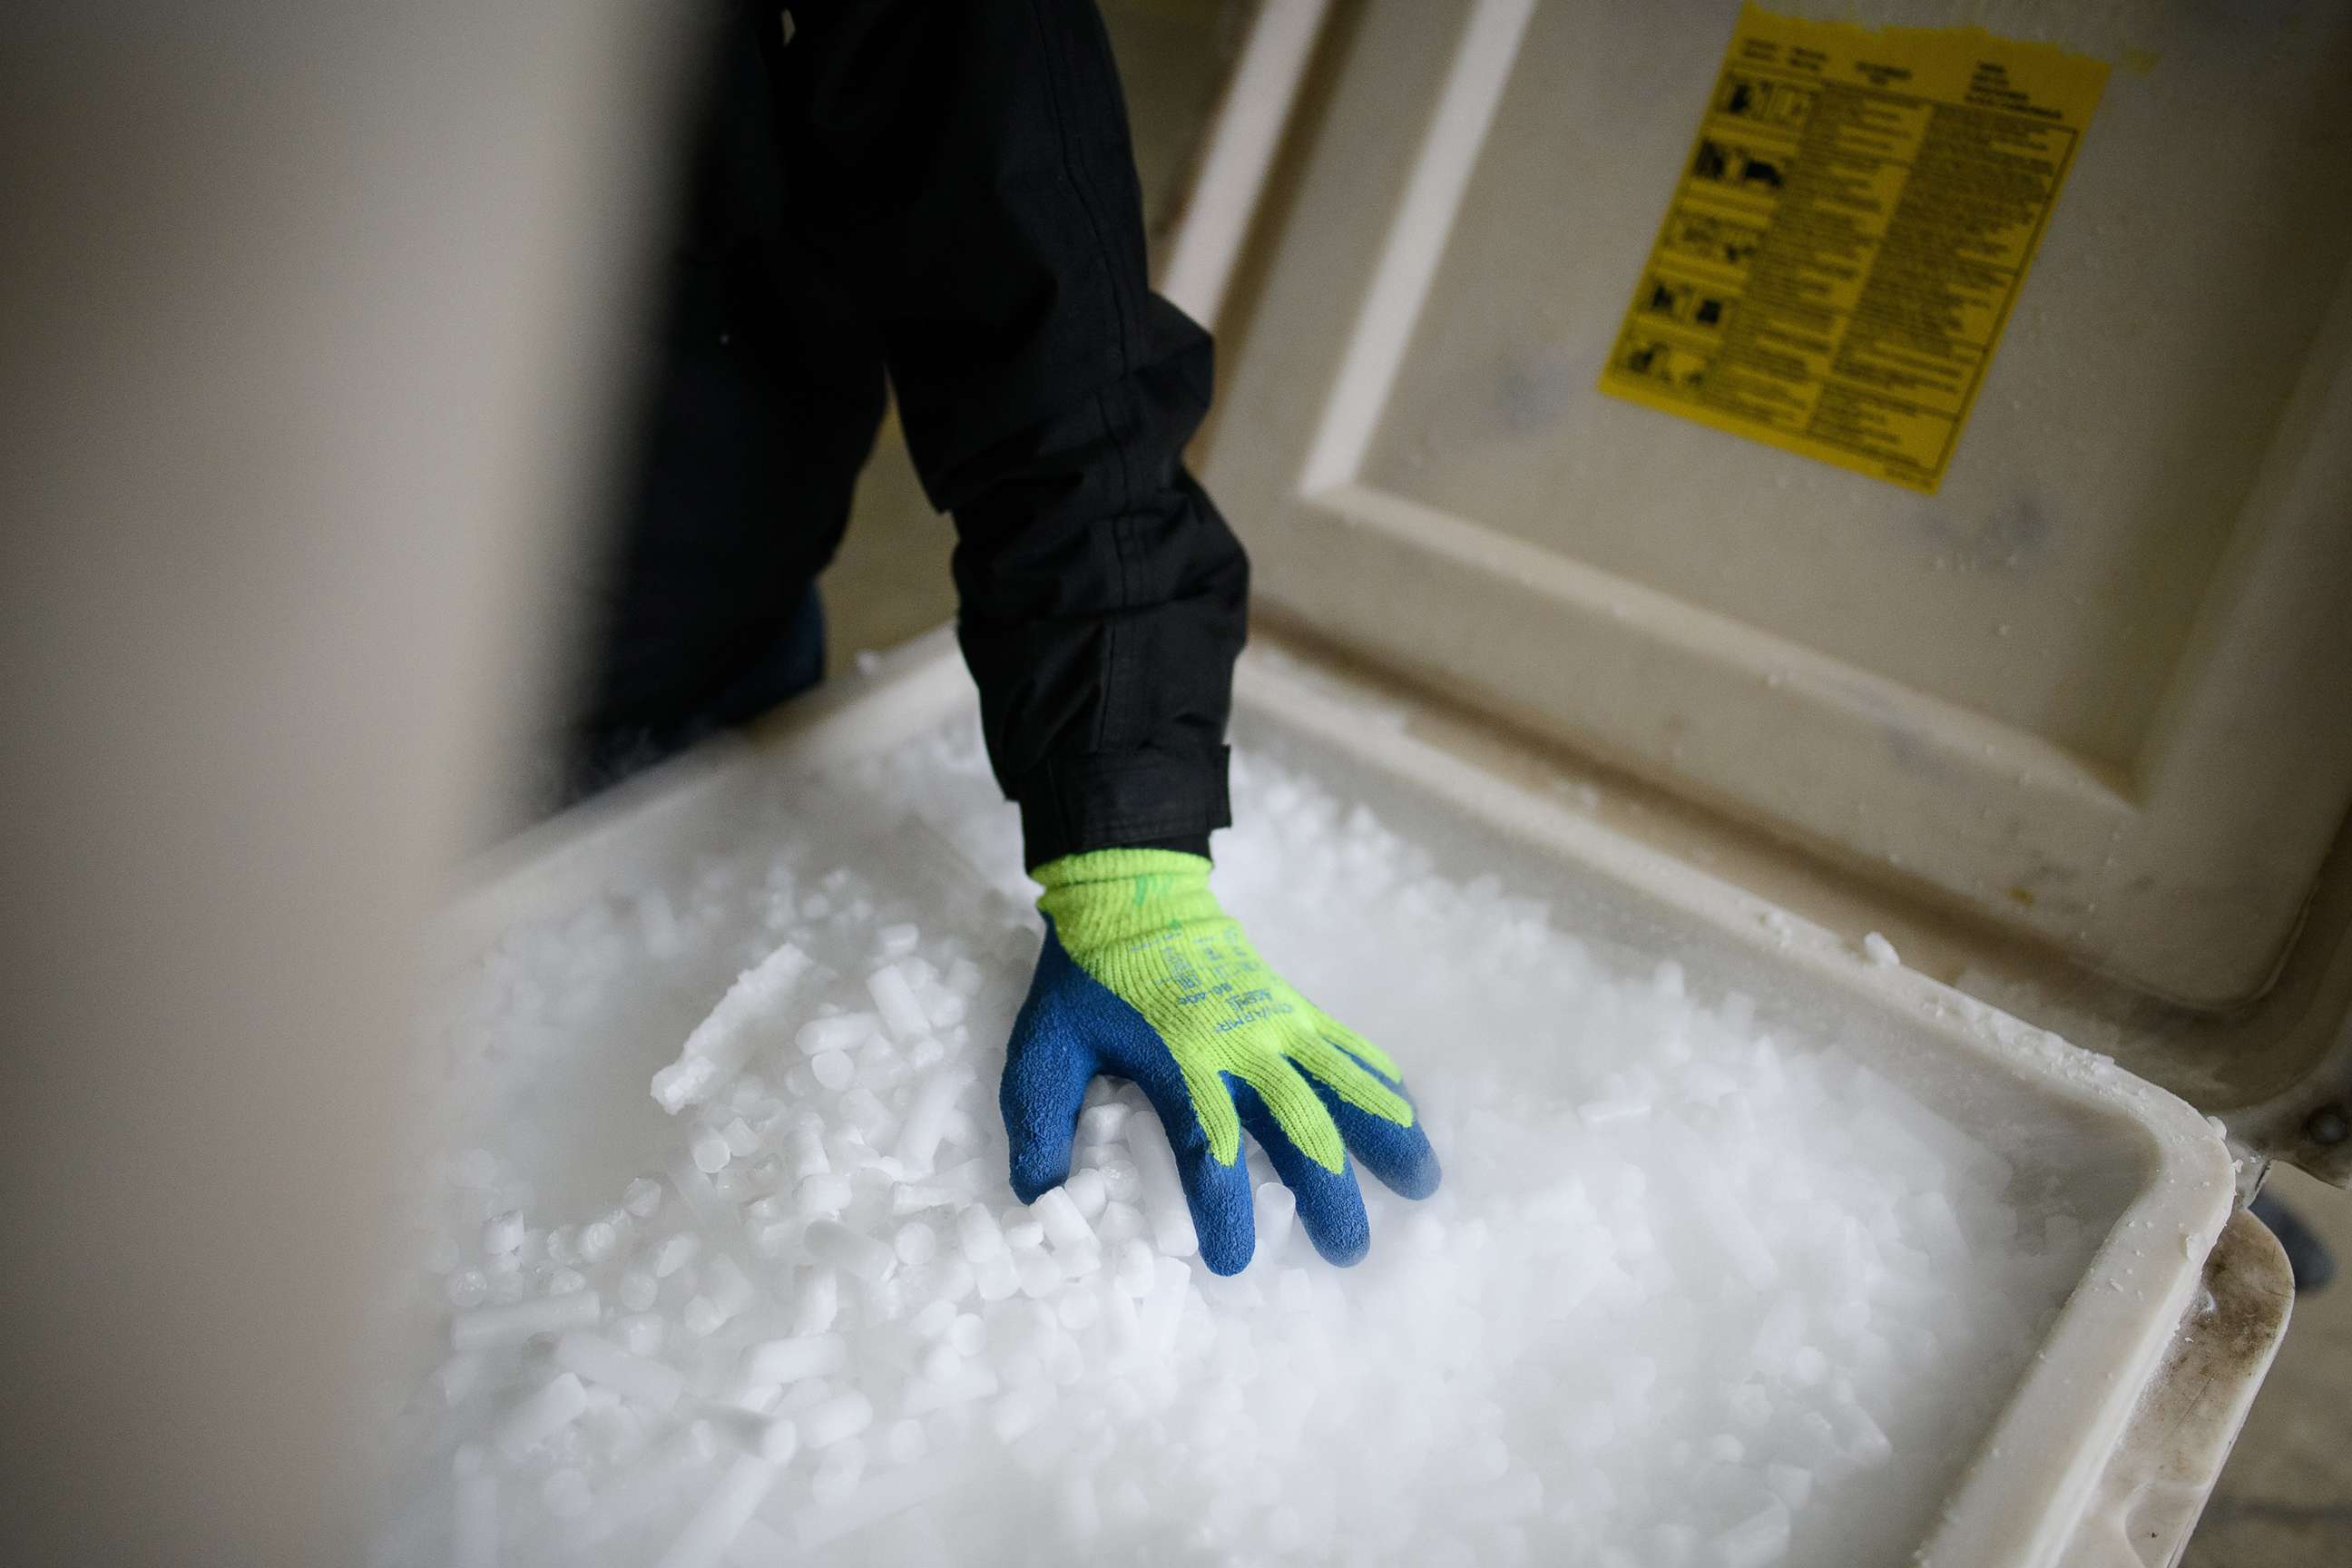 PHOTO: A man shows a fresh supply of coarse dry ice pellets at the Dry Ice Nationwide manufacturing facility, Nov. 11, 2020 in Reading, England.